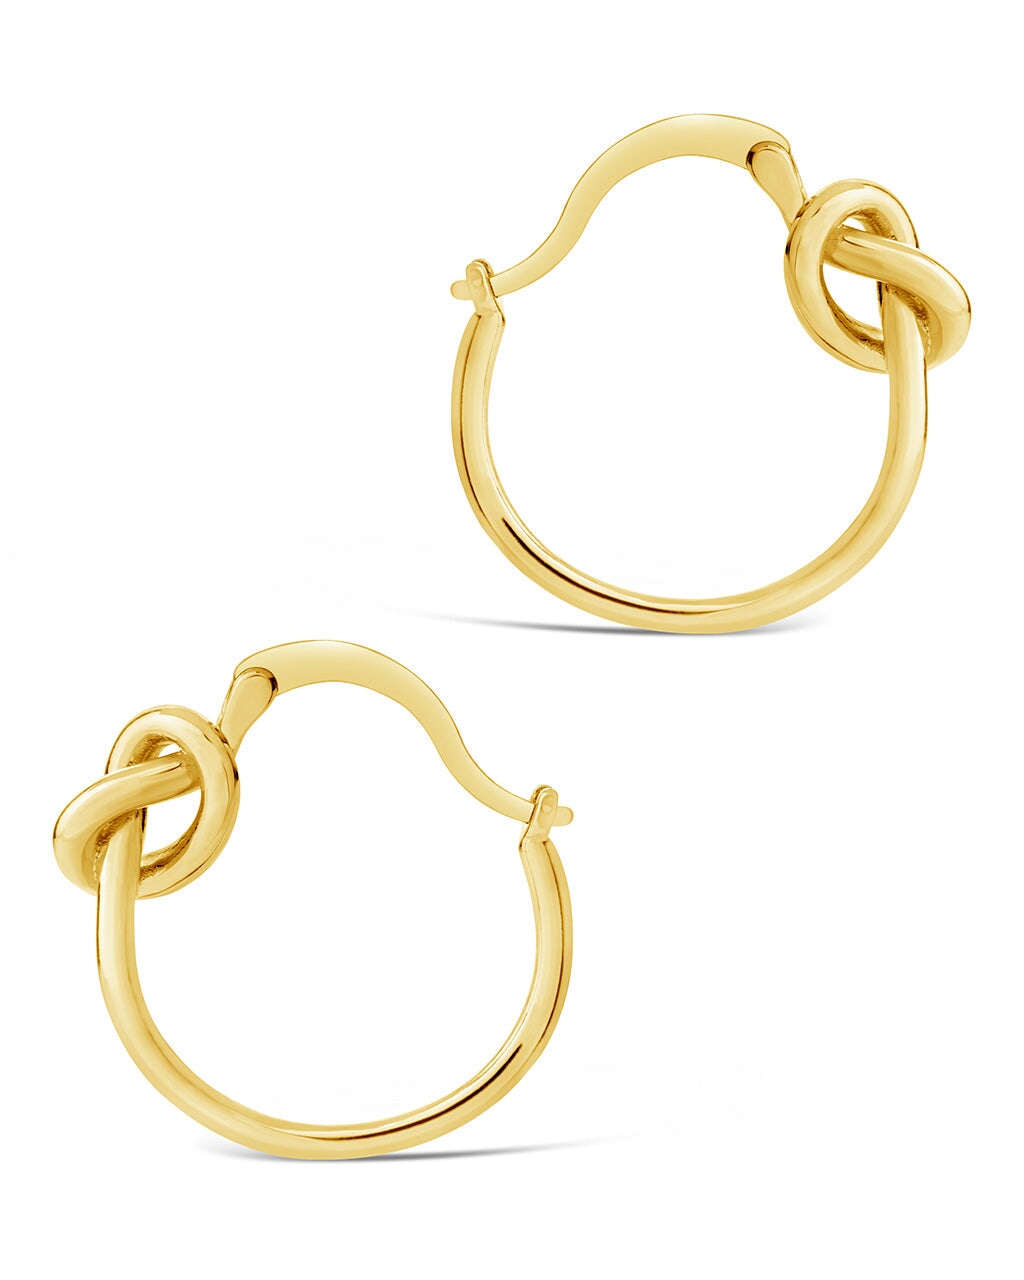 1" Twisted Love Knot Hoops Earring Sterling Forever 